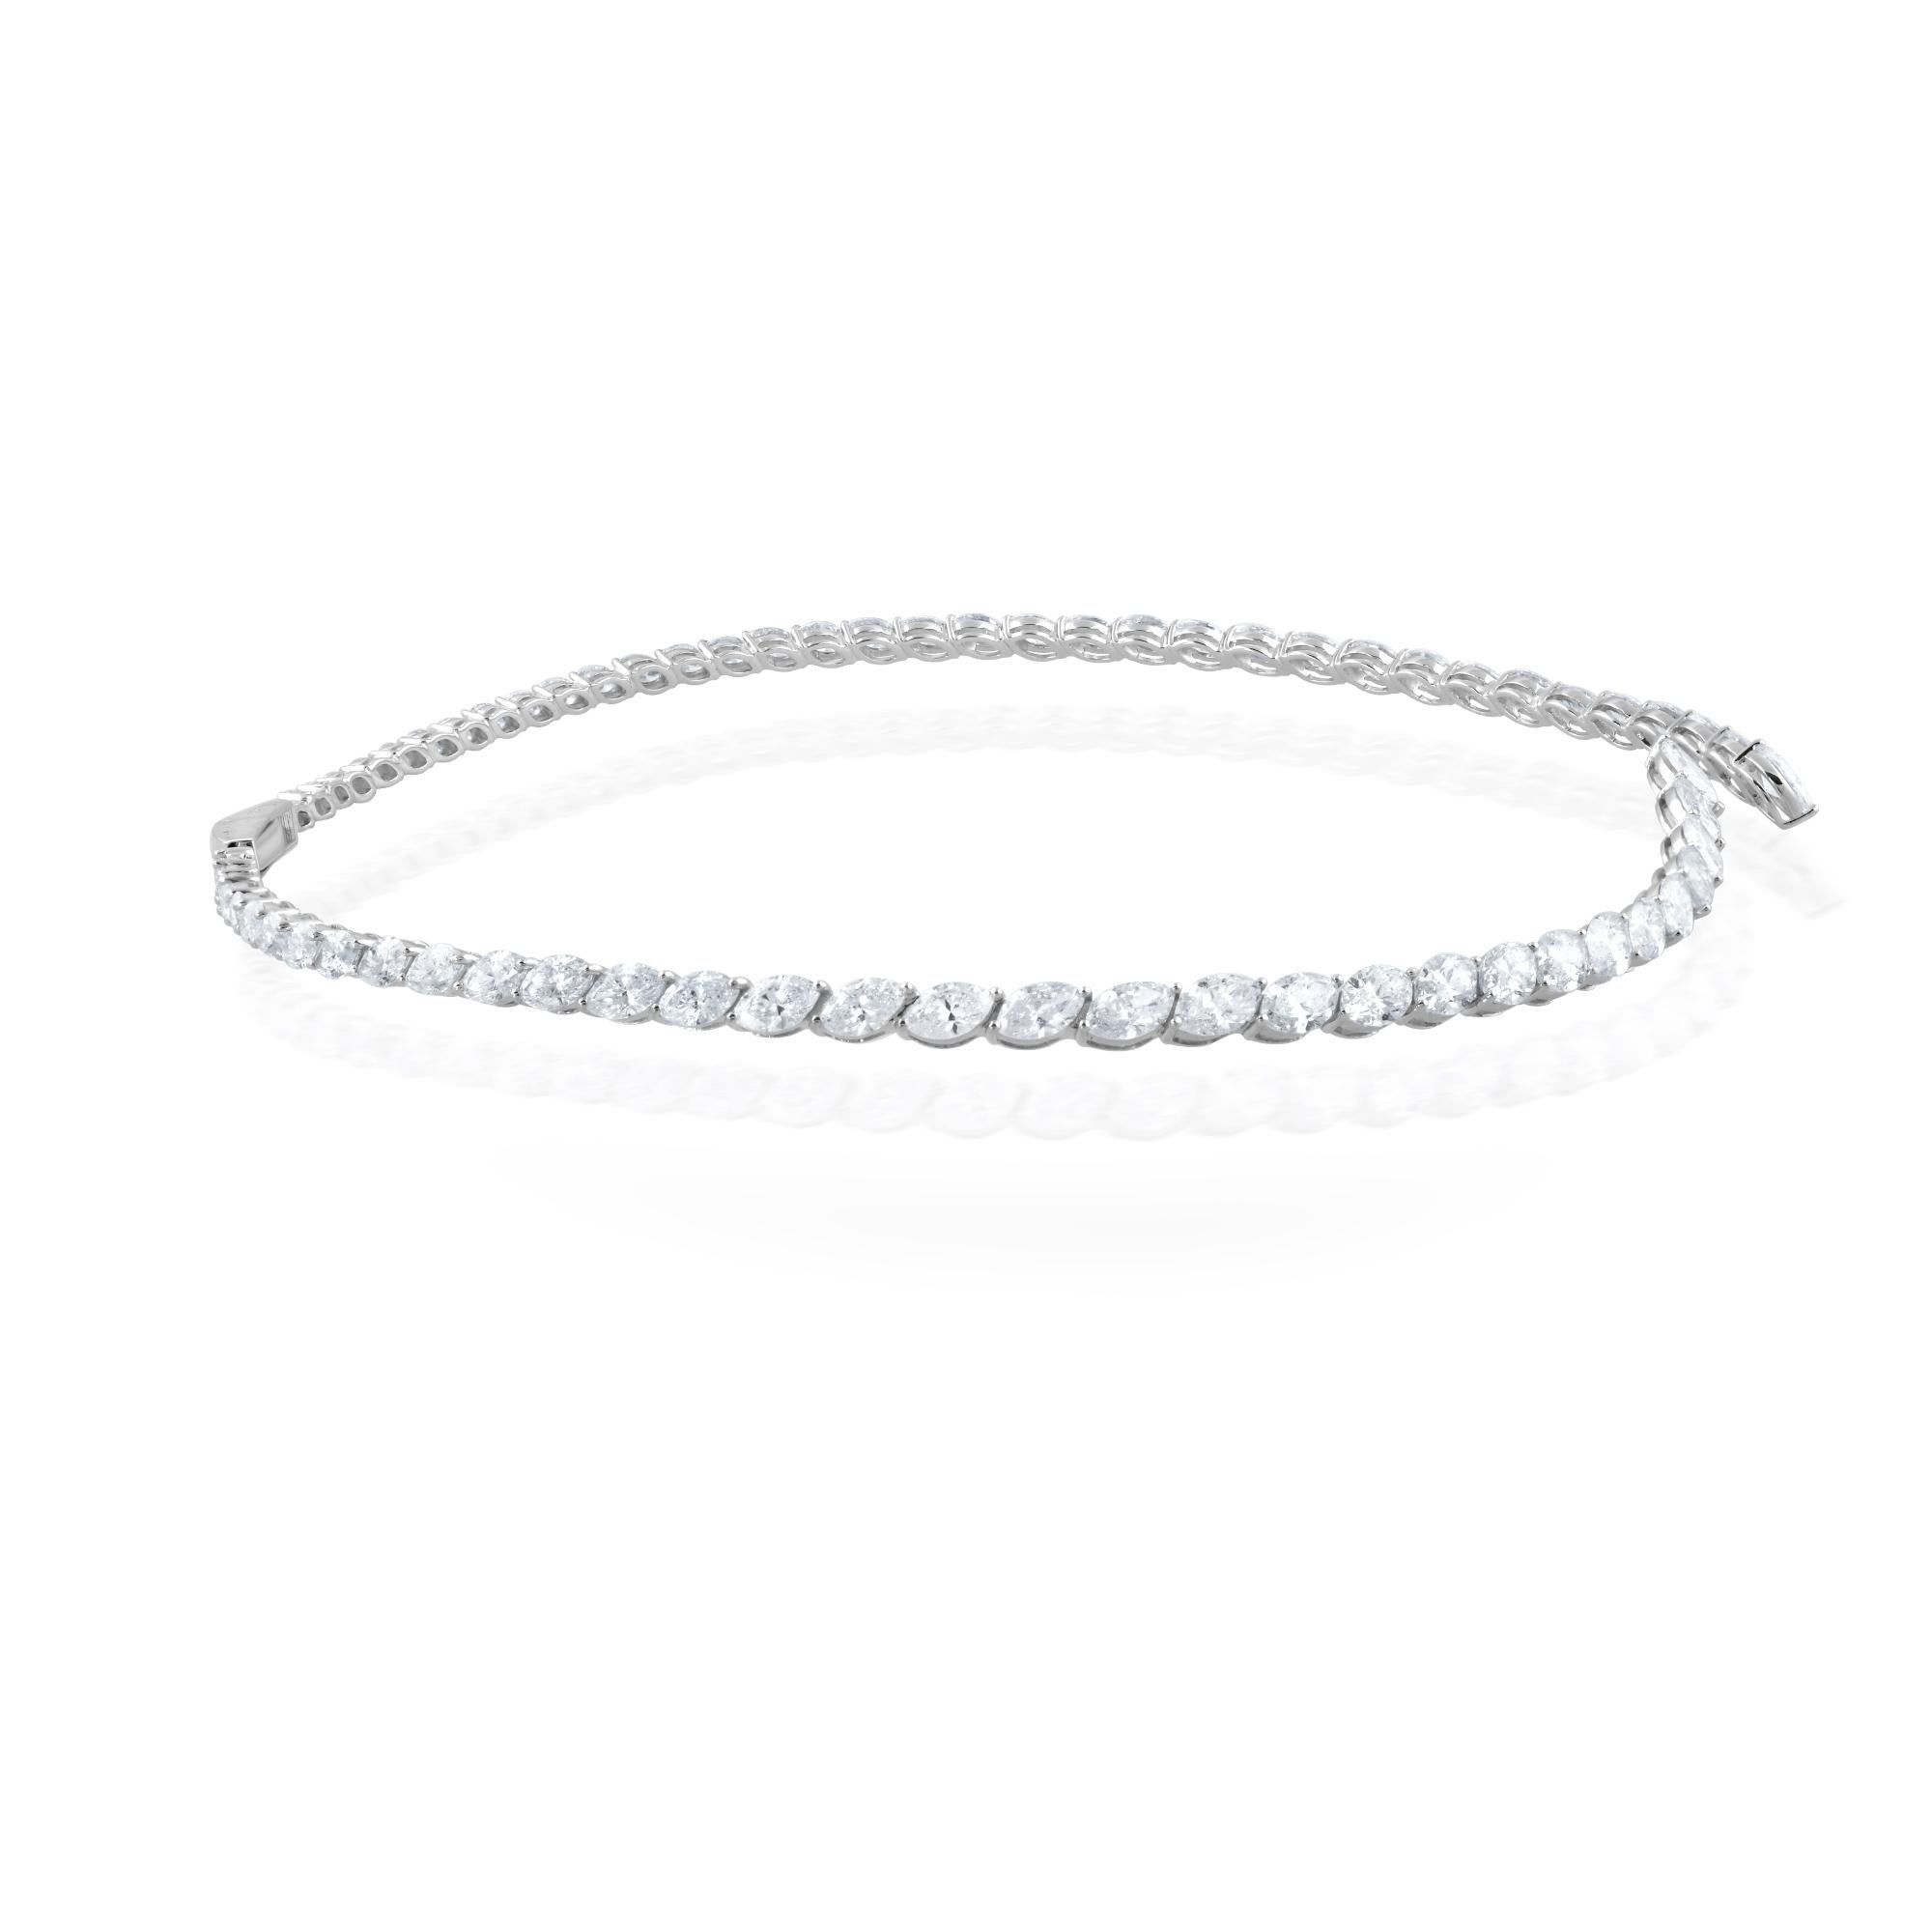 Fashioned from 18 karat white gold, this necklace exudes a timeless allure, its lustrous metal providing the perfect complement to the magnificent marquise diamonds that adorn it. Each diamond is a marvel of nature, meticulously chosen for its